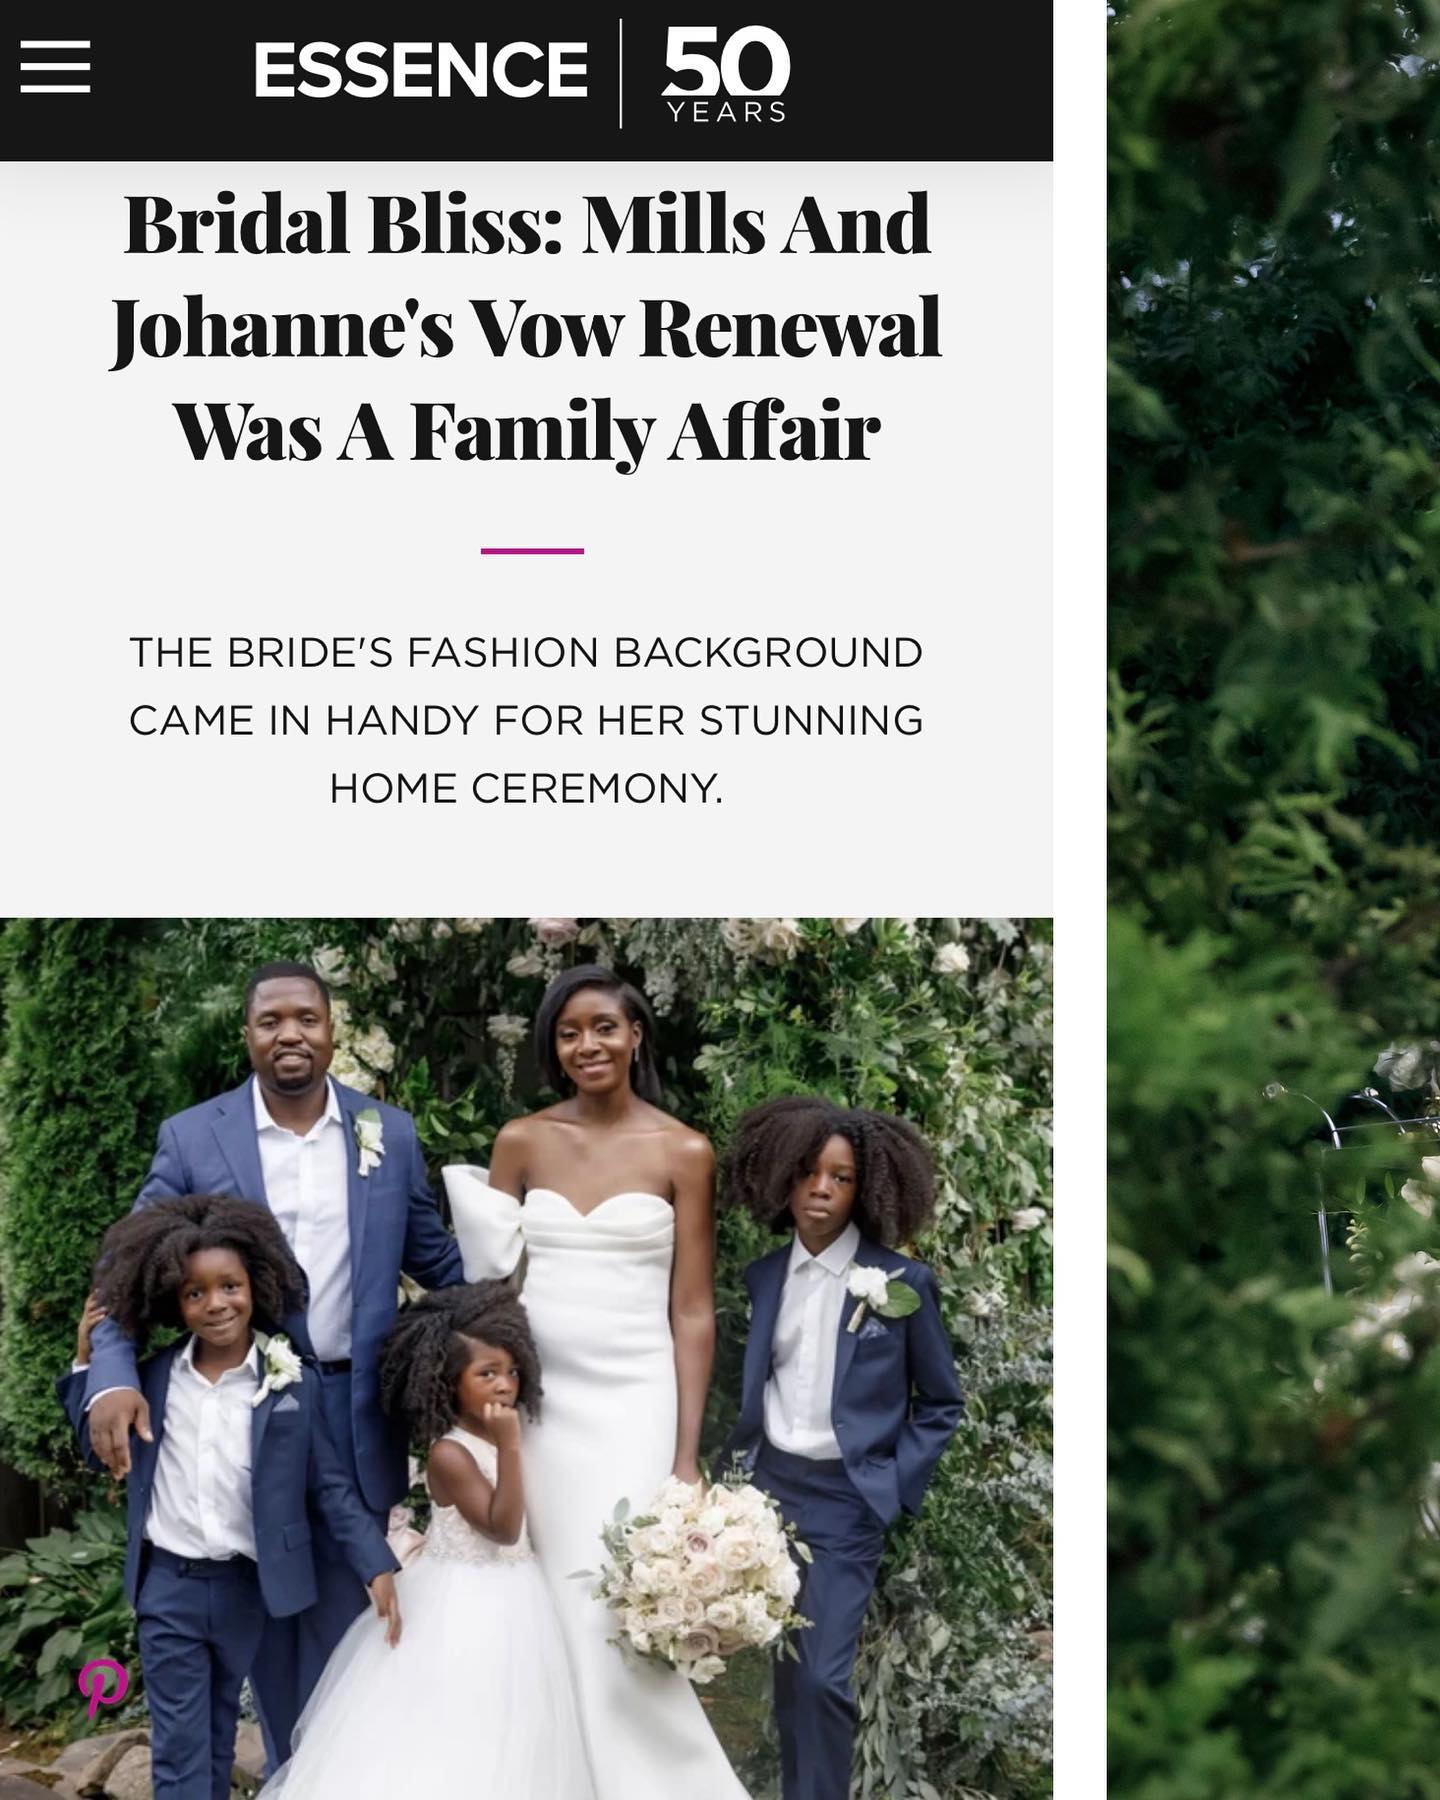 Johanne + Mills intimate vow renewal was featured in @Essence and @nytimes   Link in Bio. 



Wedding Vendor Credits:
Designer @jpeventsanddesign 
Photography @amyanaizphoto 
Videography @dexterityproductions 
Officiant @marriedbyrevroxy 
Bridal MUA @juicylooks_mua 
Stationery @bydamistudiosnyc  
Catering @chef_simeus 
Bridal Dress @badgleymischka 
Flower Girls Dress @monbebecouture 
Linens @nuagedesignsinc 
Rentals @glampartyrentals 
Little boys suit @isaacmizrahiny 
Groom suit @prada 
Cake @nattyssweetshop 
Napkin Treatments @tinparade 
Florals @fmifarms